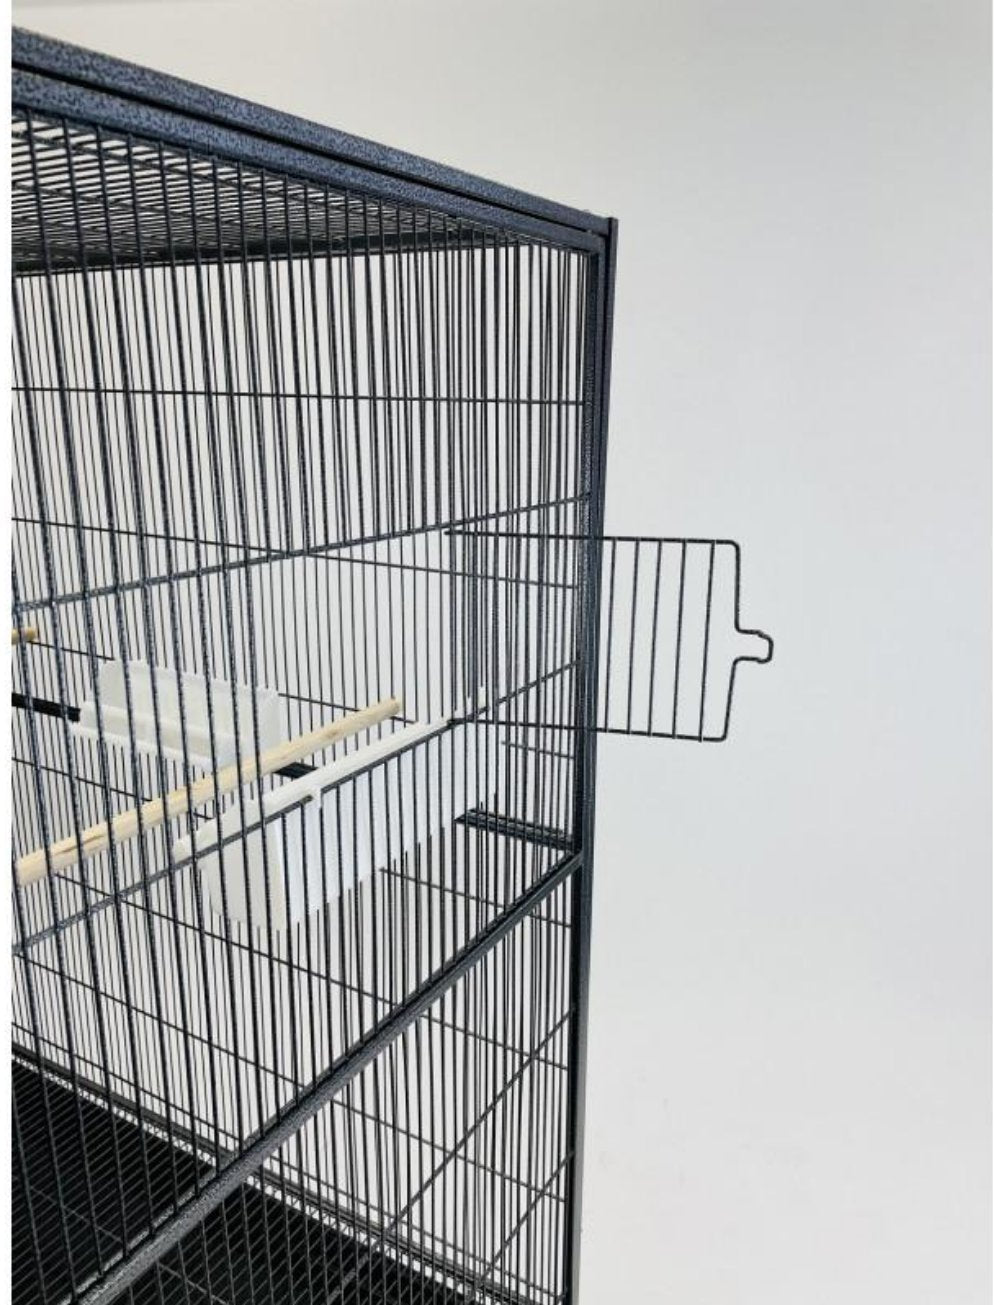 65X21" LARGE DOUBLE FLIGHT CAGE WITH DIVIDER